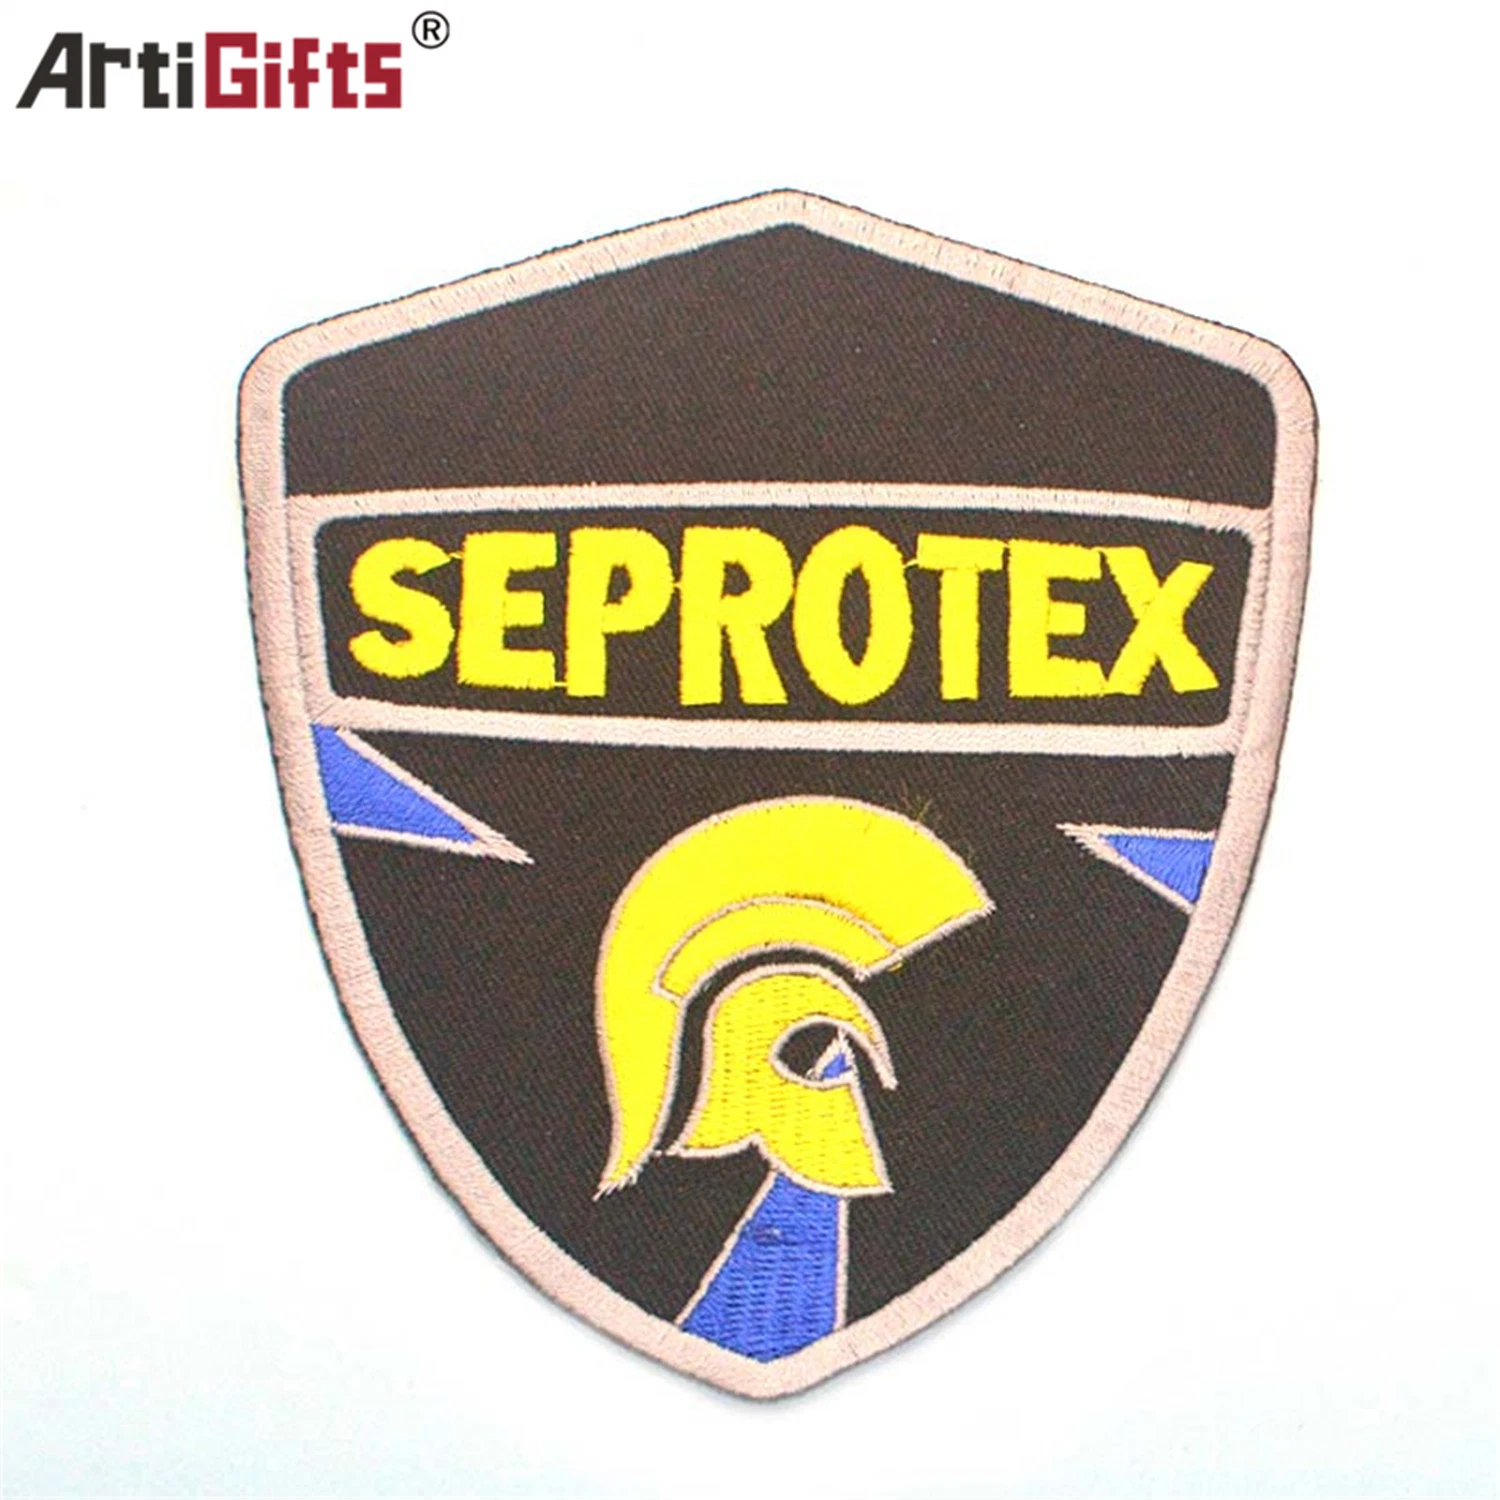 Fashion Fabric Design Embroidery Patch with Glue